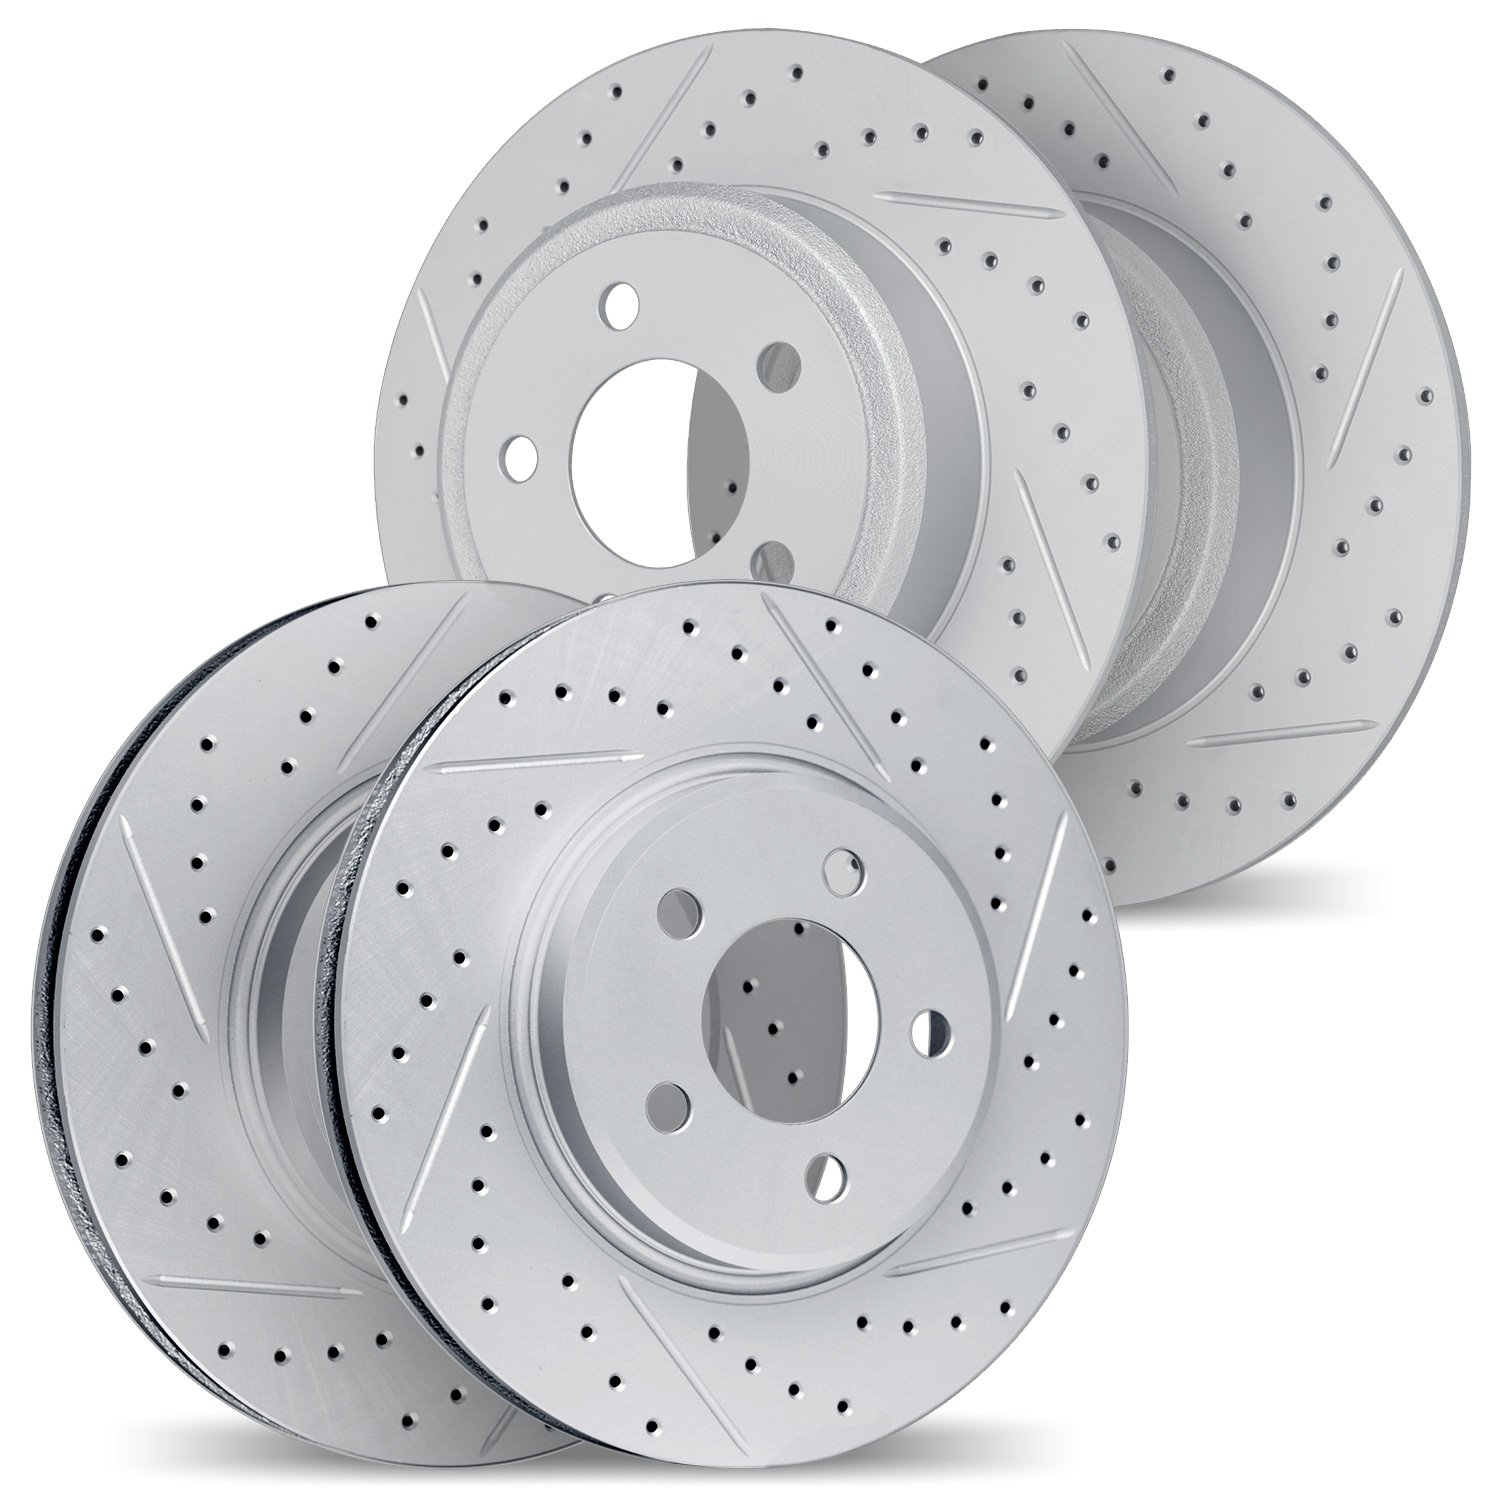 2004-76001 Geoperformance Drilled/Slotted Brake Rotors, 2010-2015 Lexus/Toyota/Scion, Position: Front and Rear